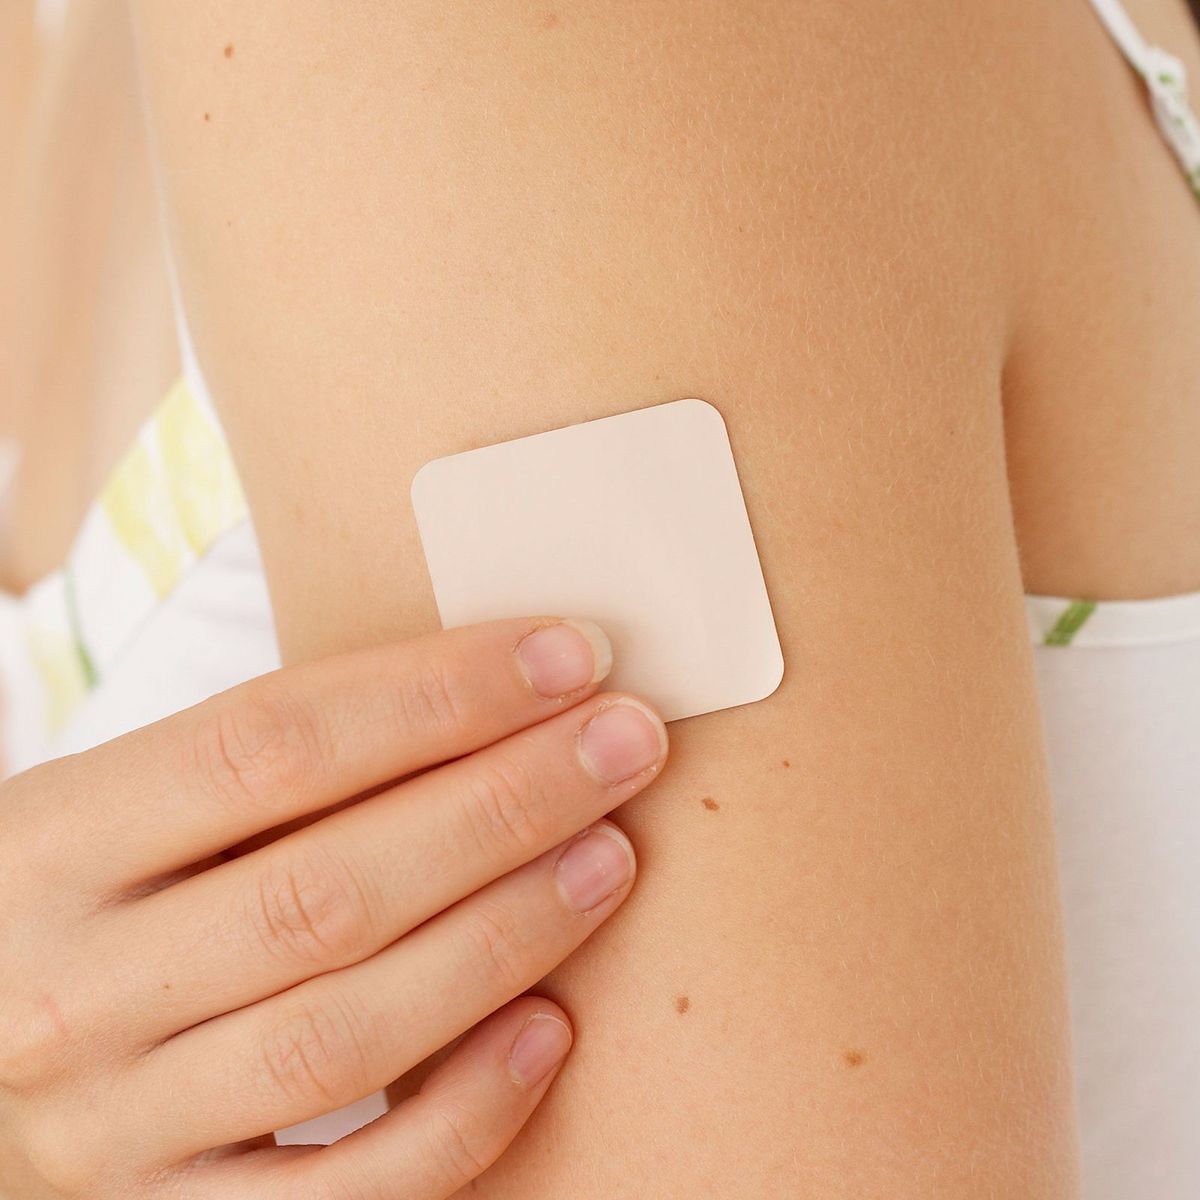 Can Nicotine Patches Cause Shortness of Breath?